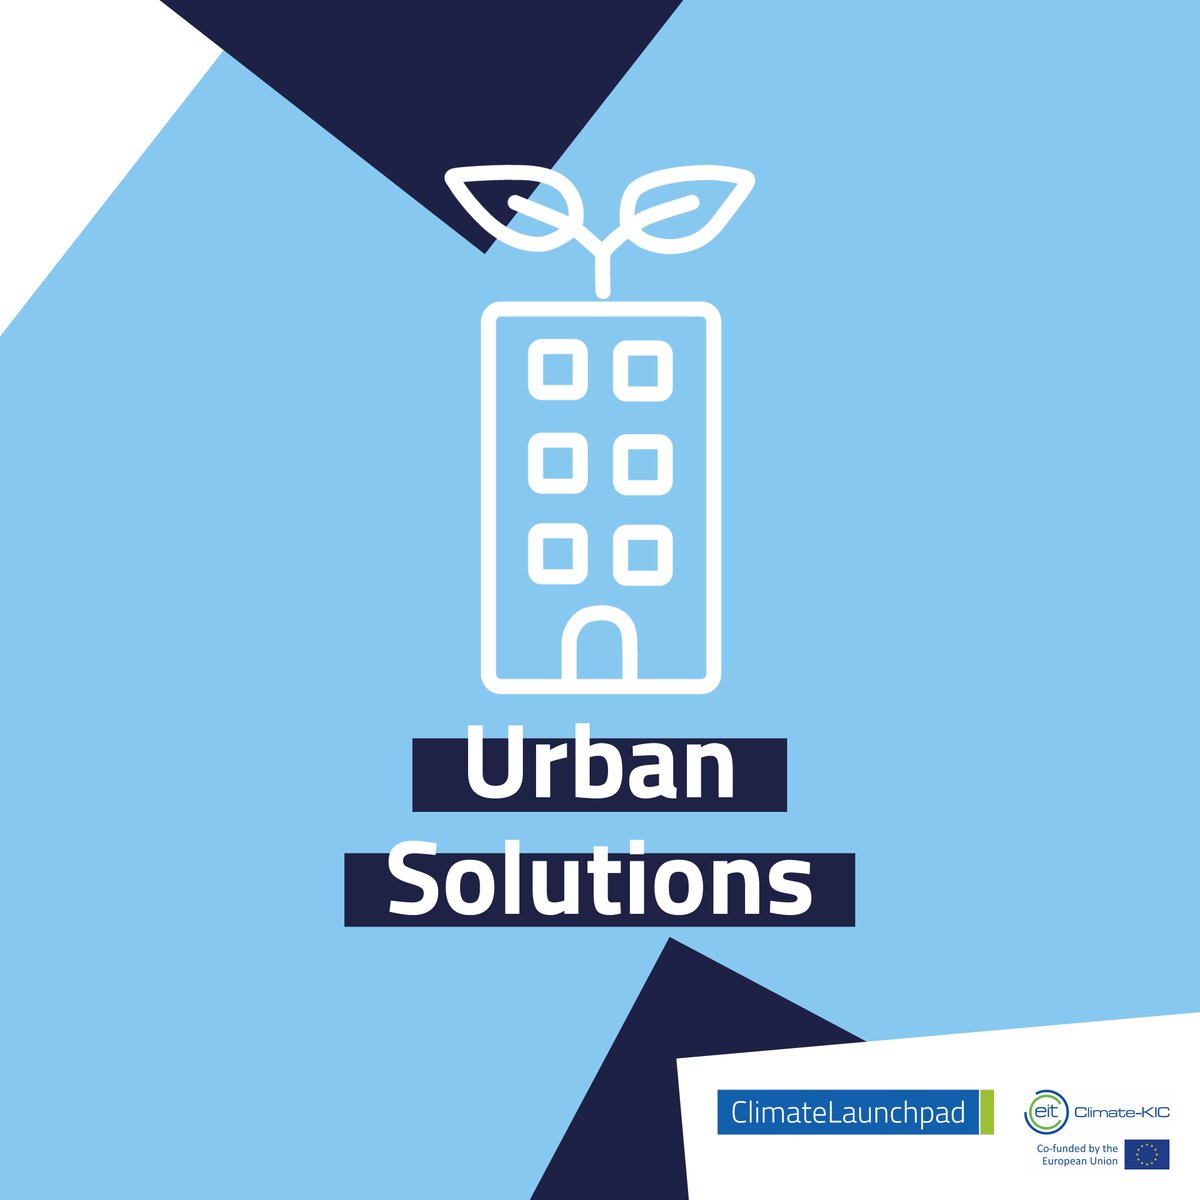 Did you know that #cities produce half the planet's #waste and generate 60-80% of global #greenhouse gas #emissions? Apply quickly if you have a business idea that fits our theme Urban Solutions: climatelaunchpad.org/application-fo… 🏙️💚 #Startups #competition #CLP22 @ClimateKIC